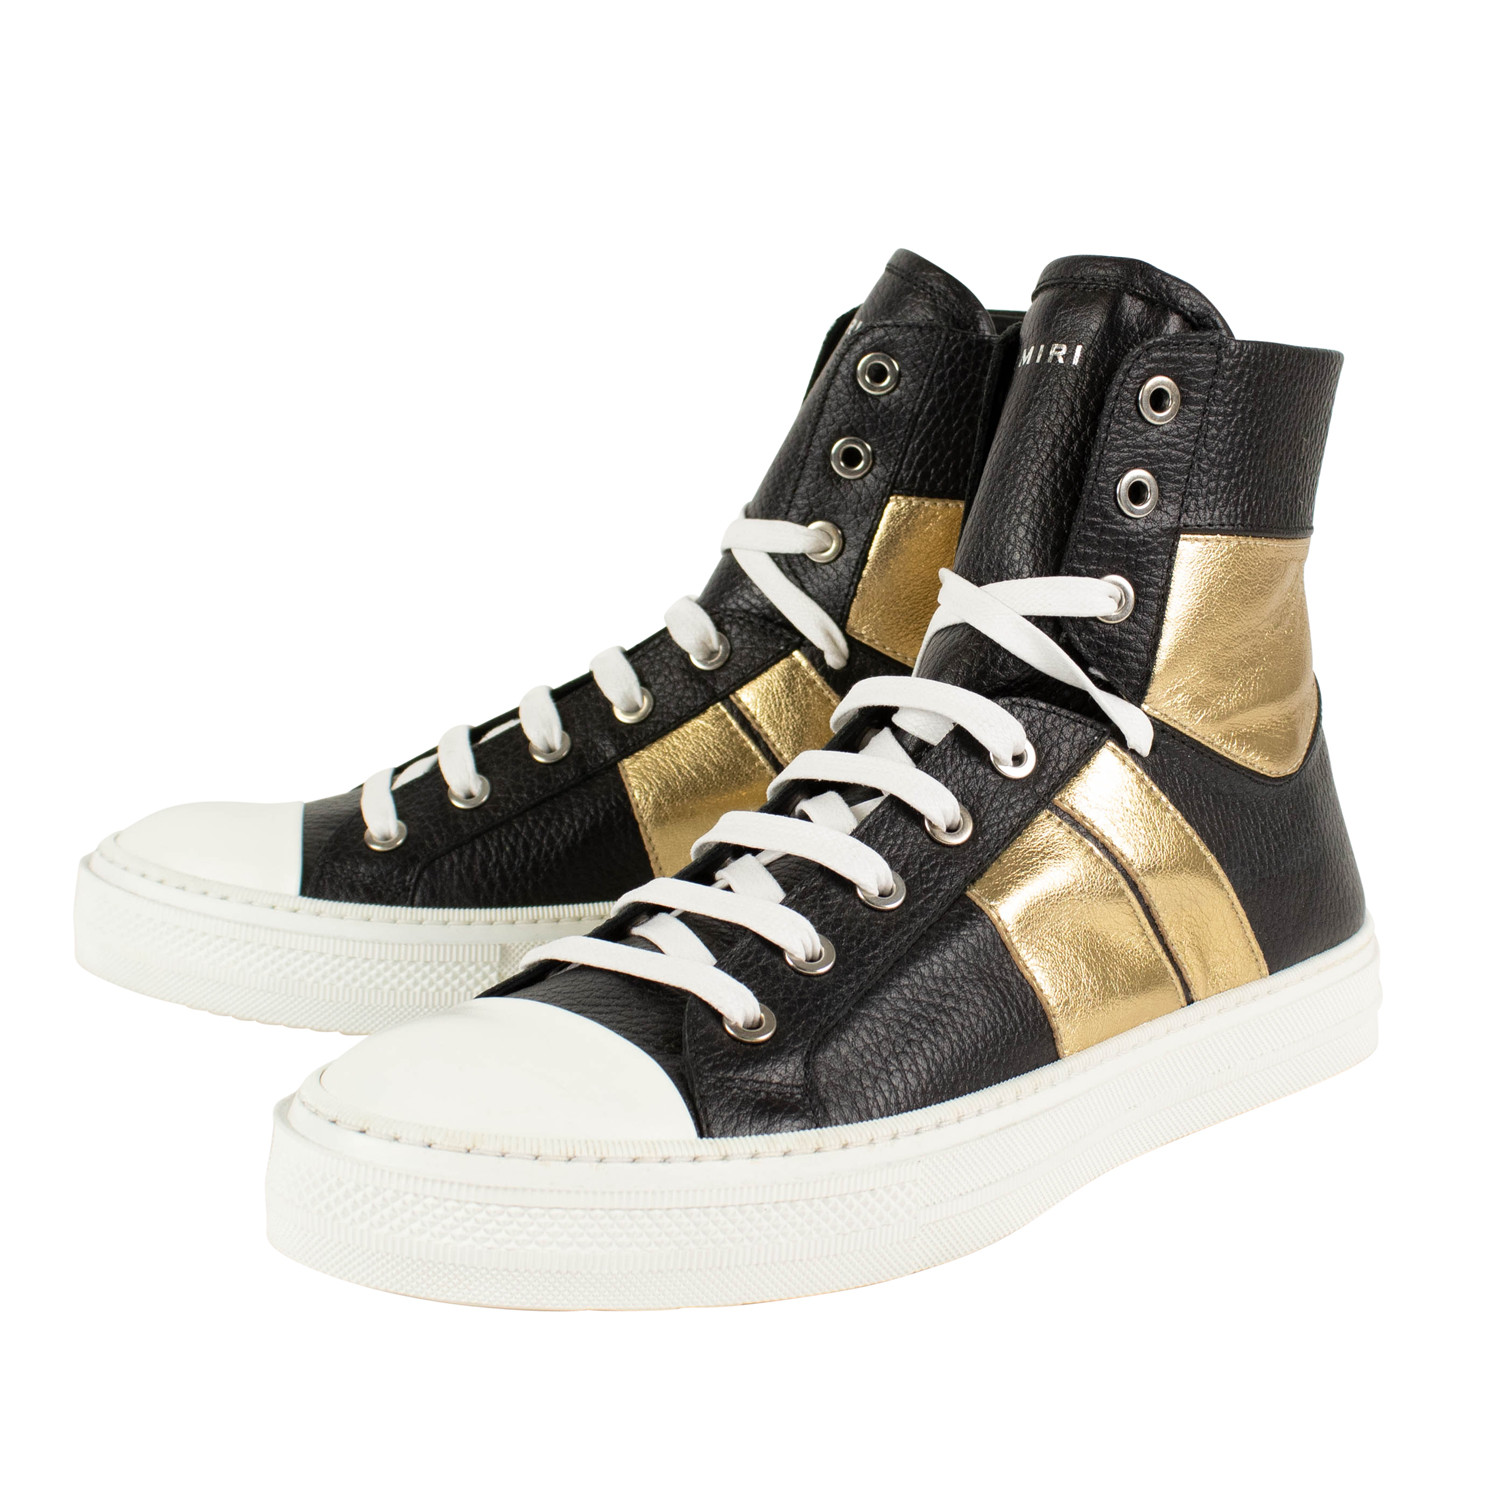 black and gold designer sneakers